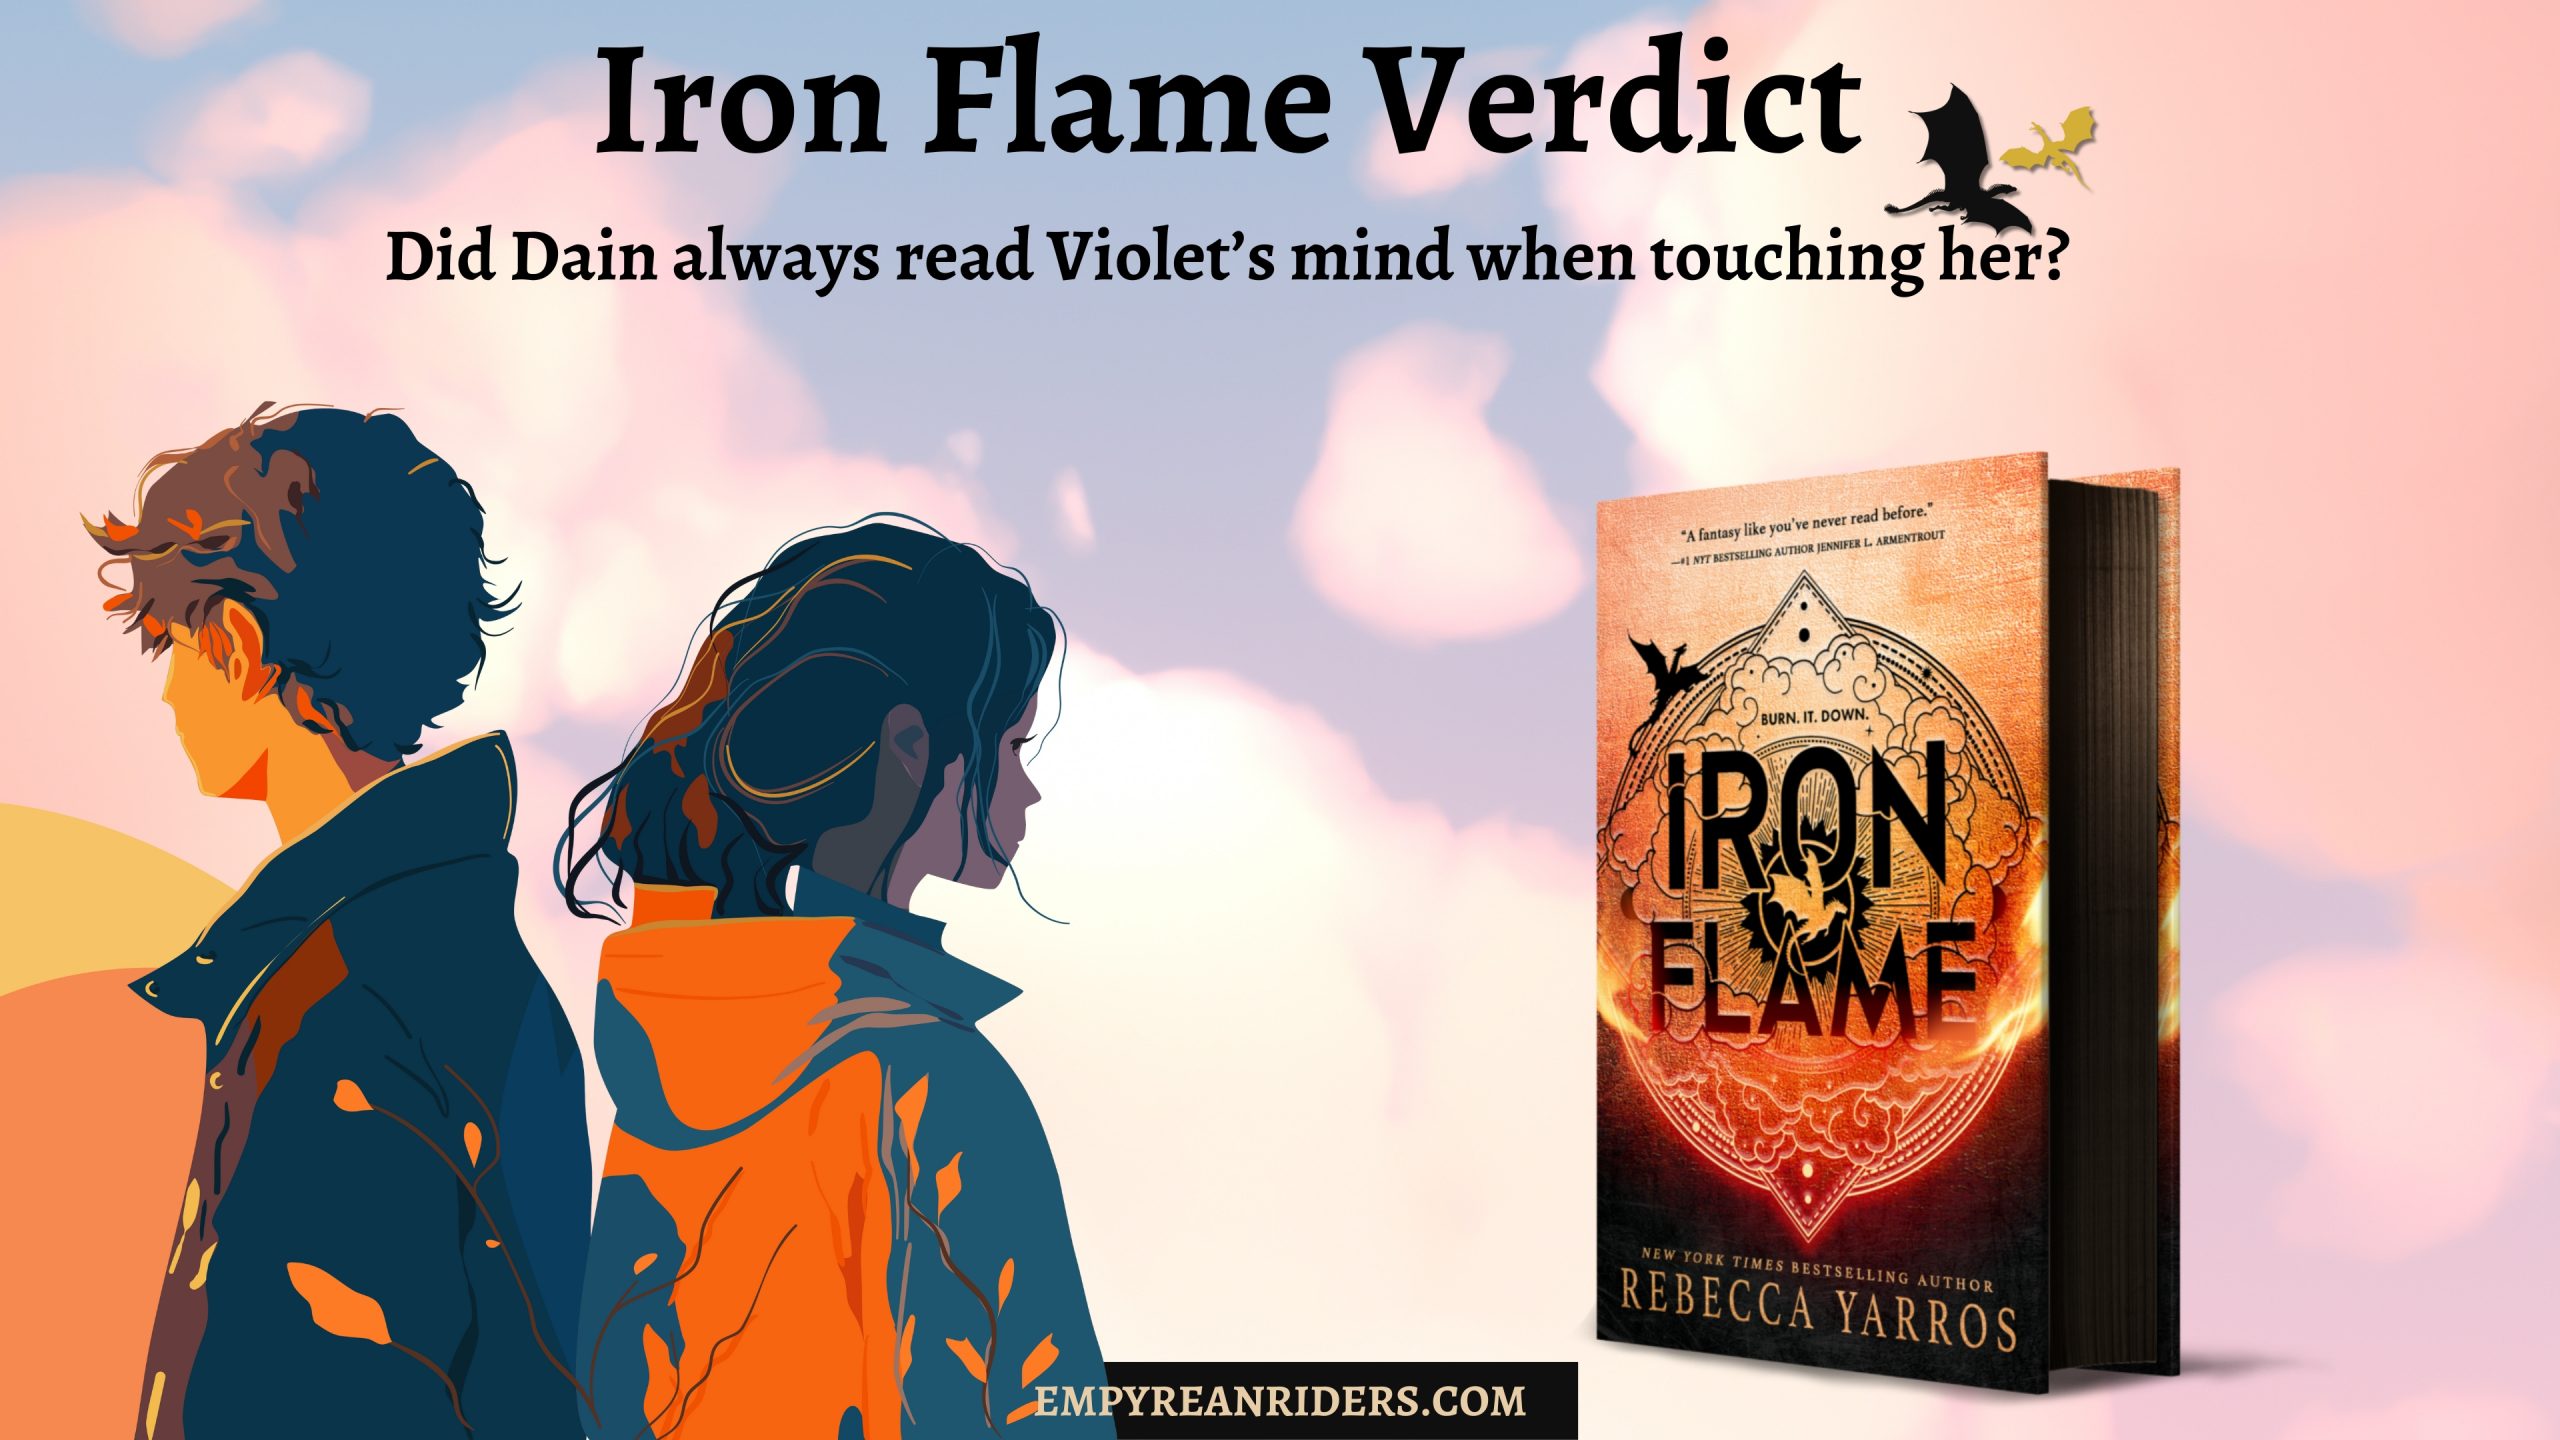 Iron Flame Verdict: Did Dain always read Violet’s mind when touching her?